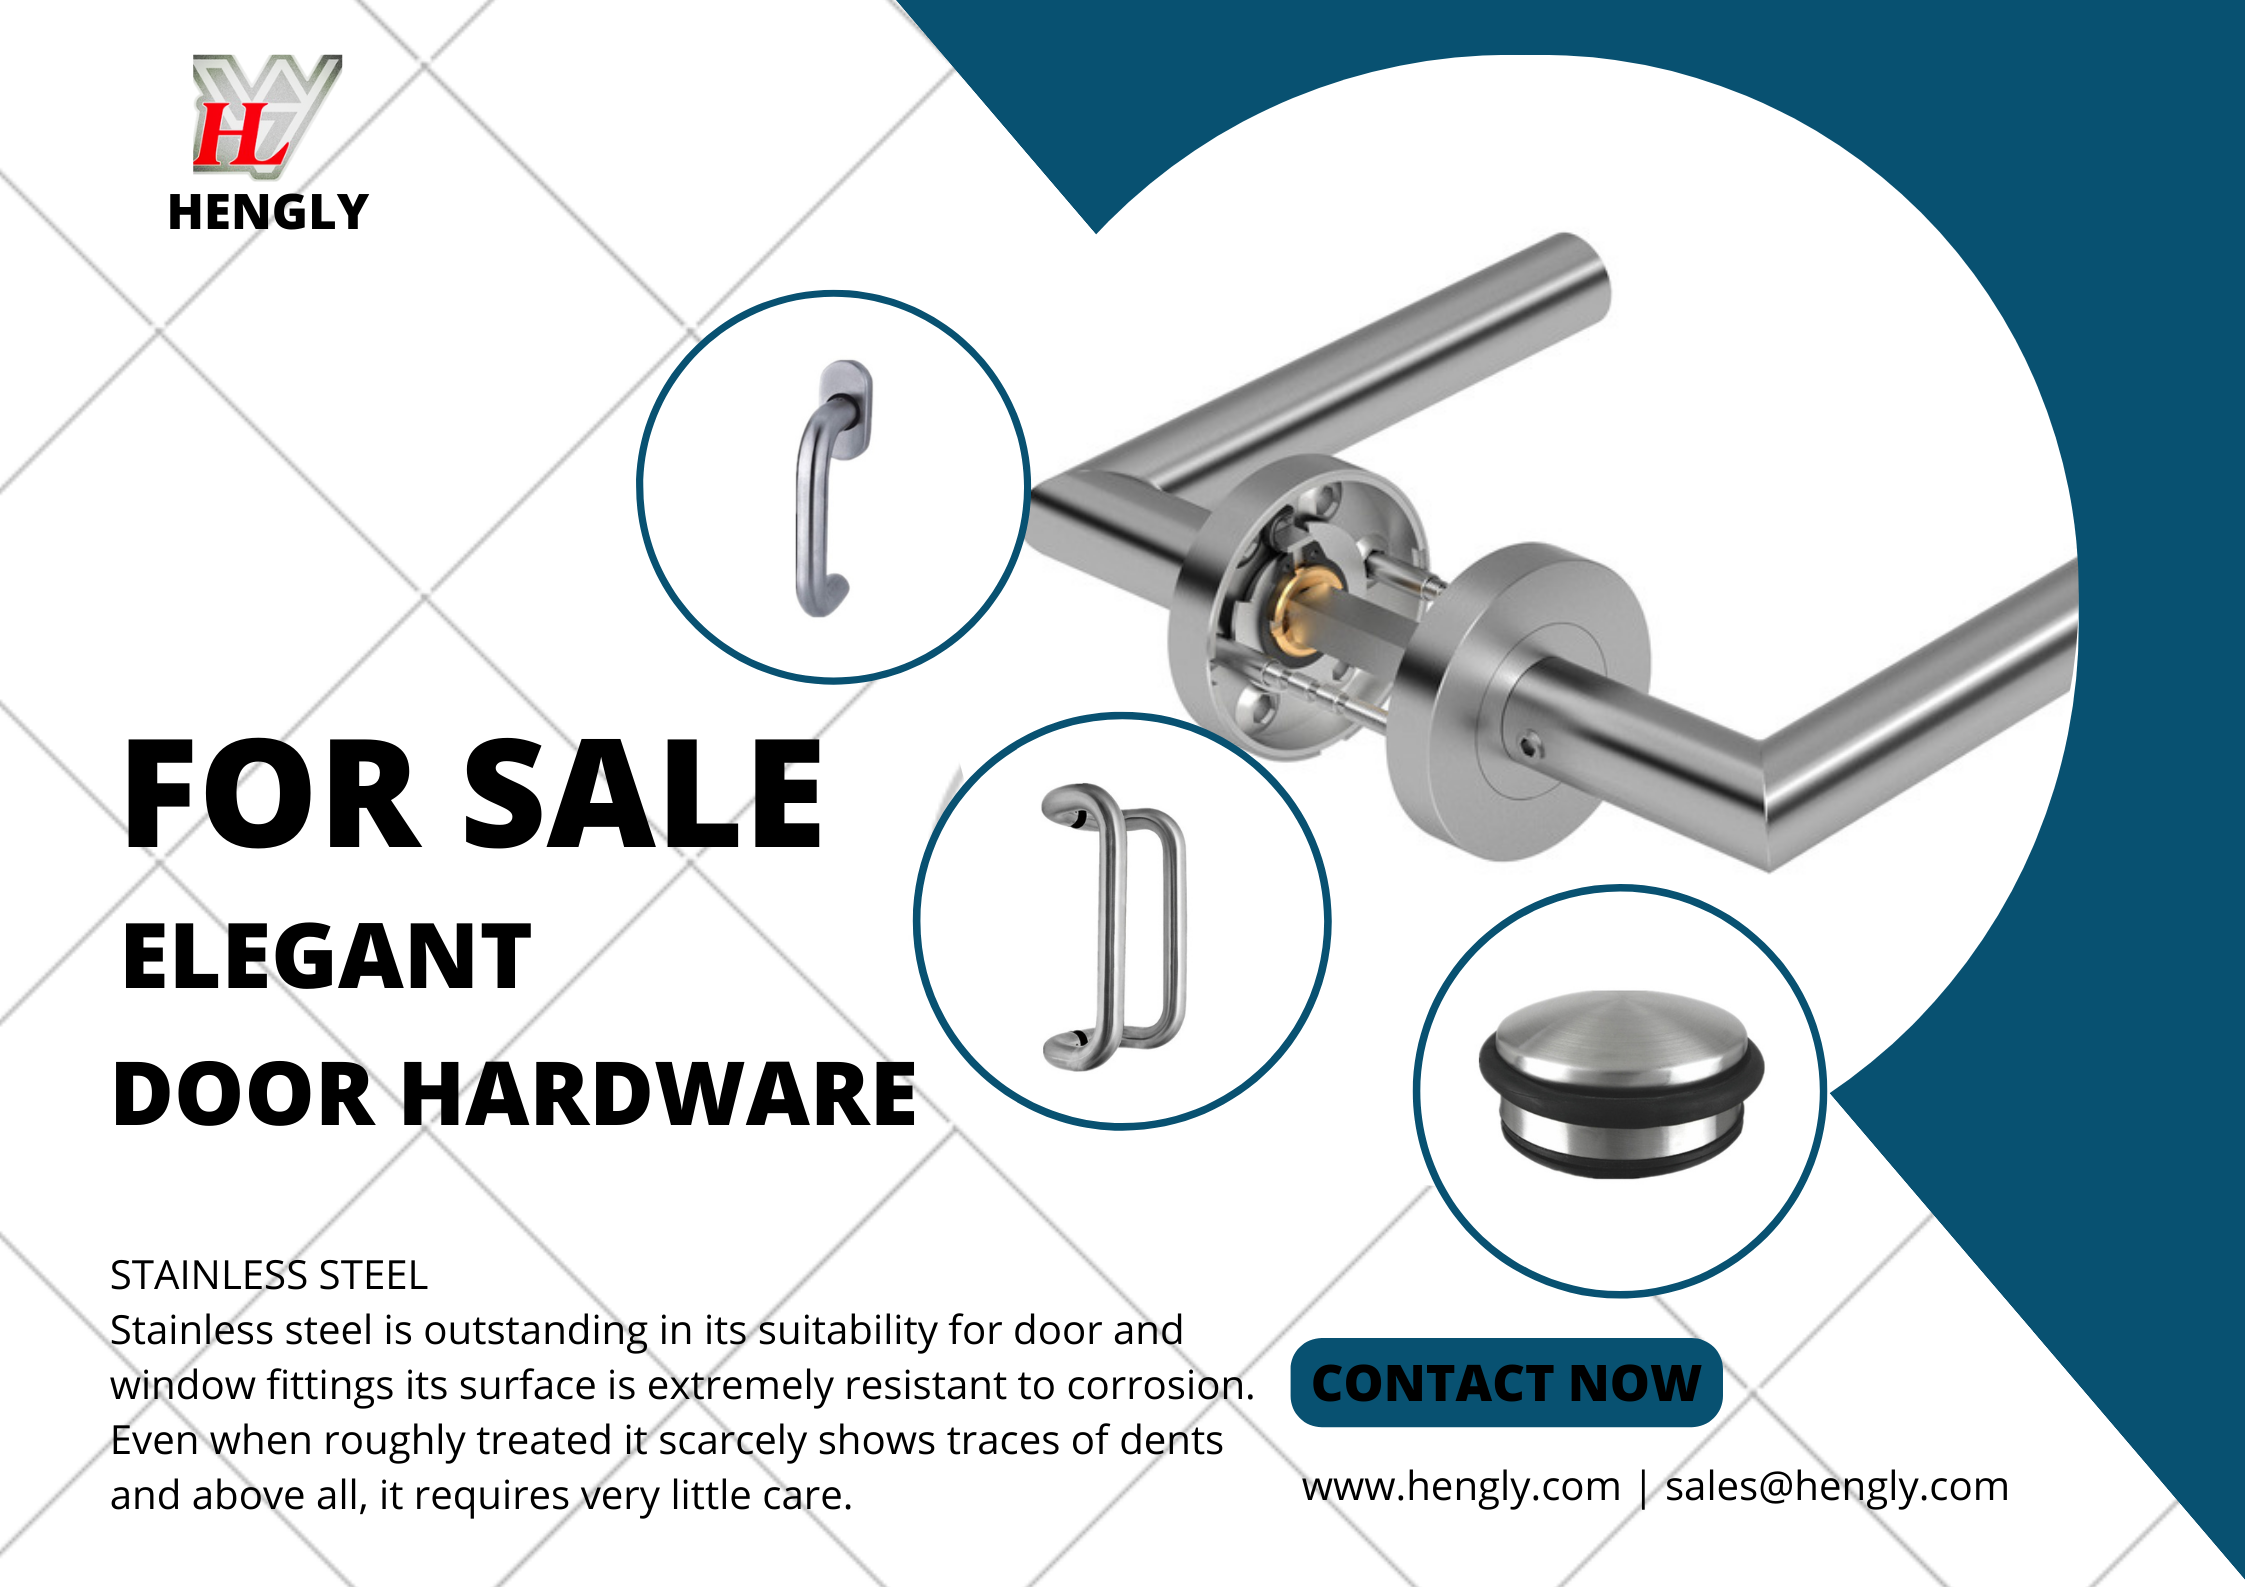 Are you looking for qualified door hardware to add to your inventory? 